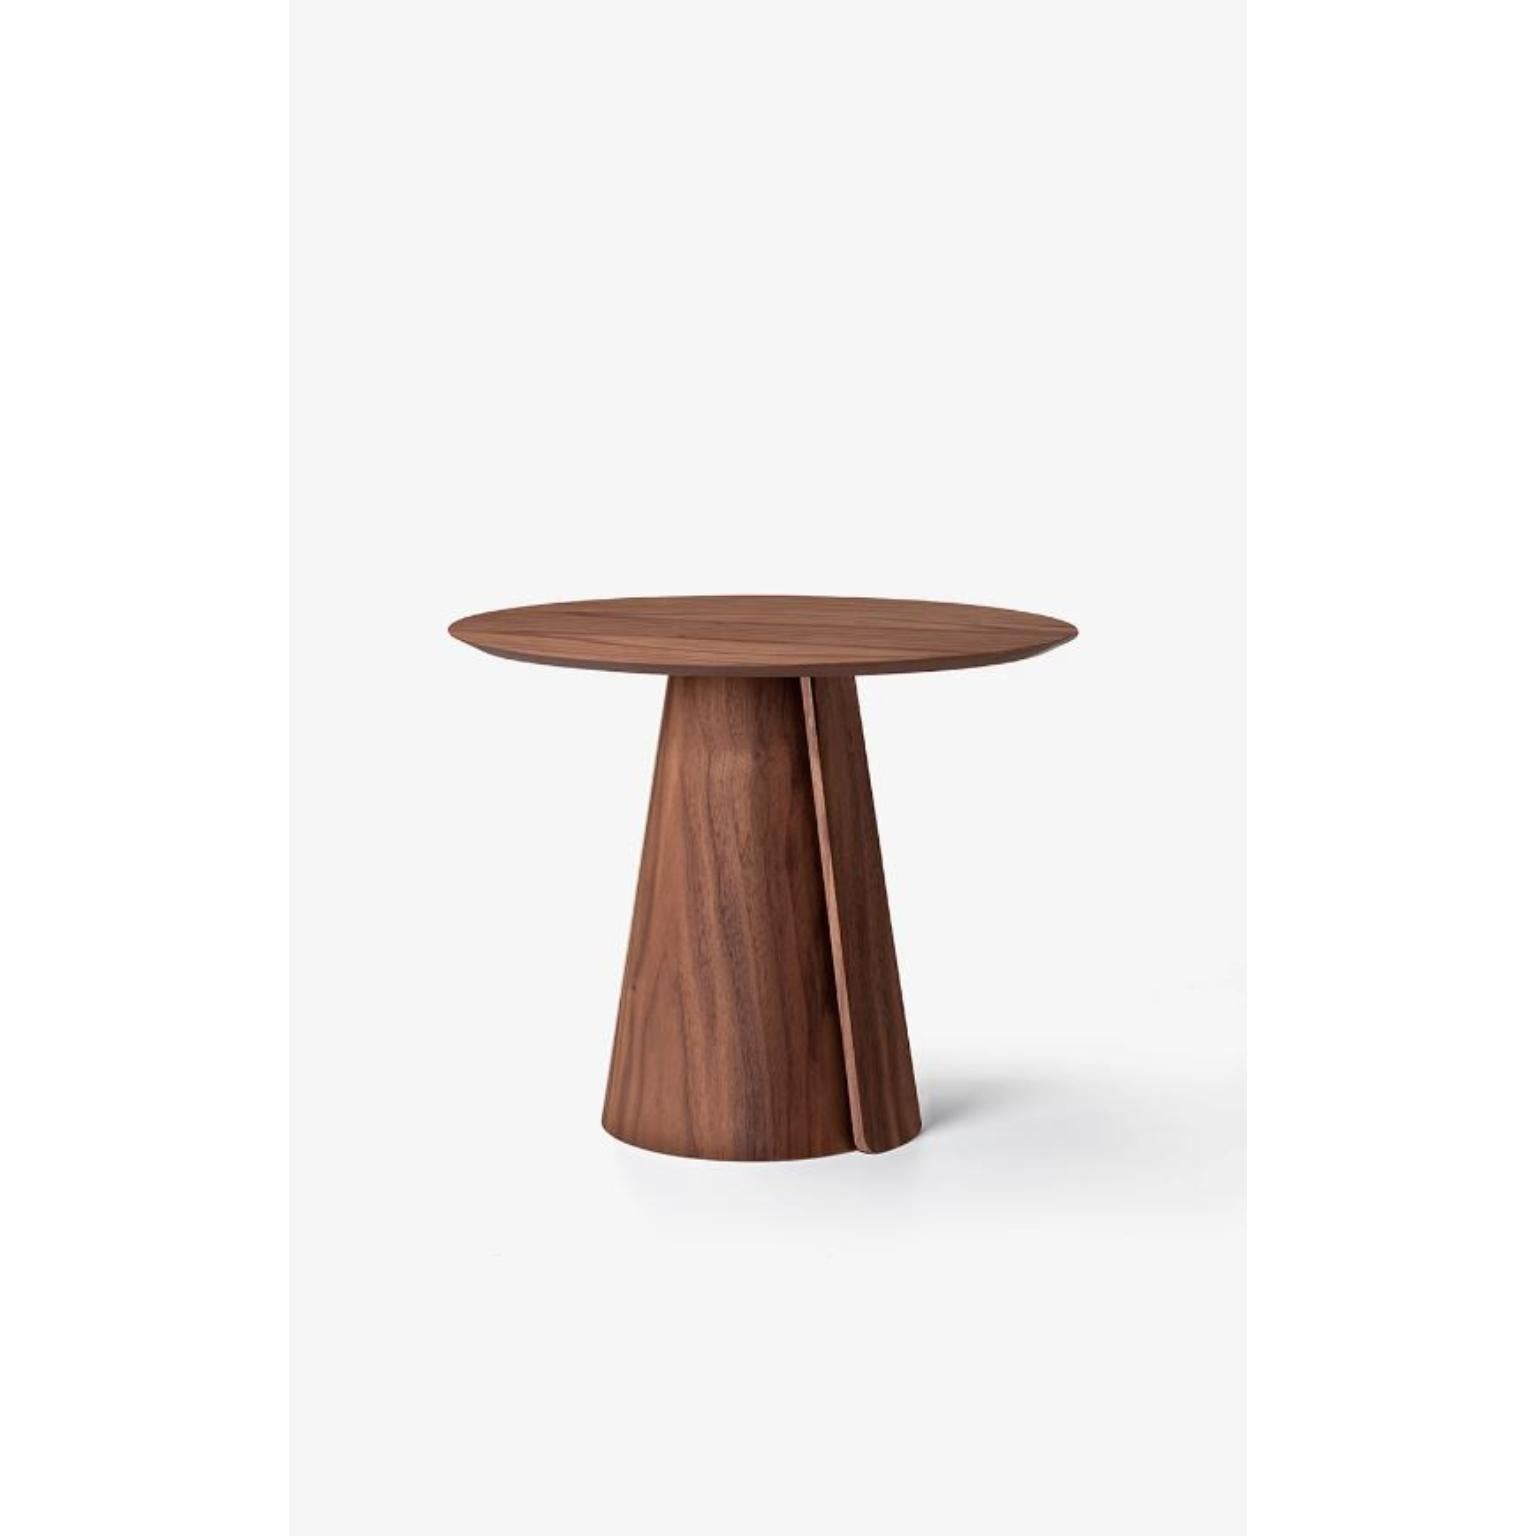 Volta Dining Table 140 by Wentz
Dimensions: D 140 x W 140 x H 75 cm
Materials: Wood, Plywood, MDF, Natural Wood Veneer, Steel.
Weight: 95kg / 209 lbs

The Volta table references nature in its impermanence. The detail on the base suggests natural